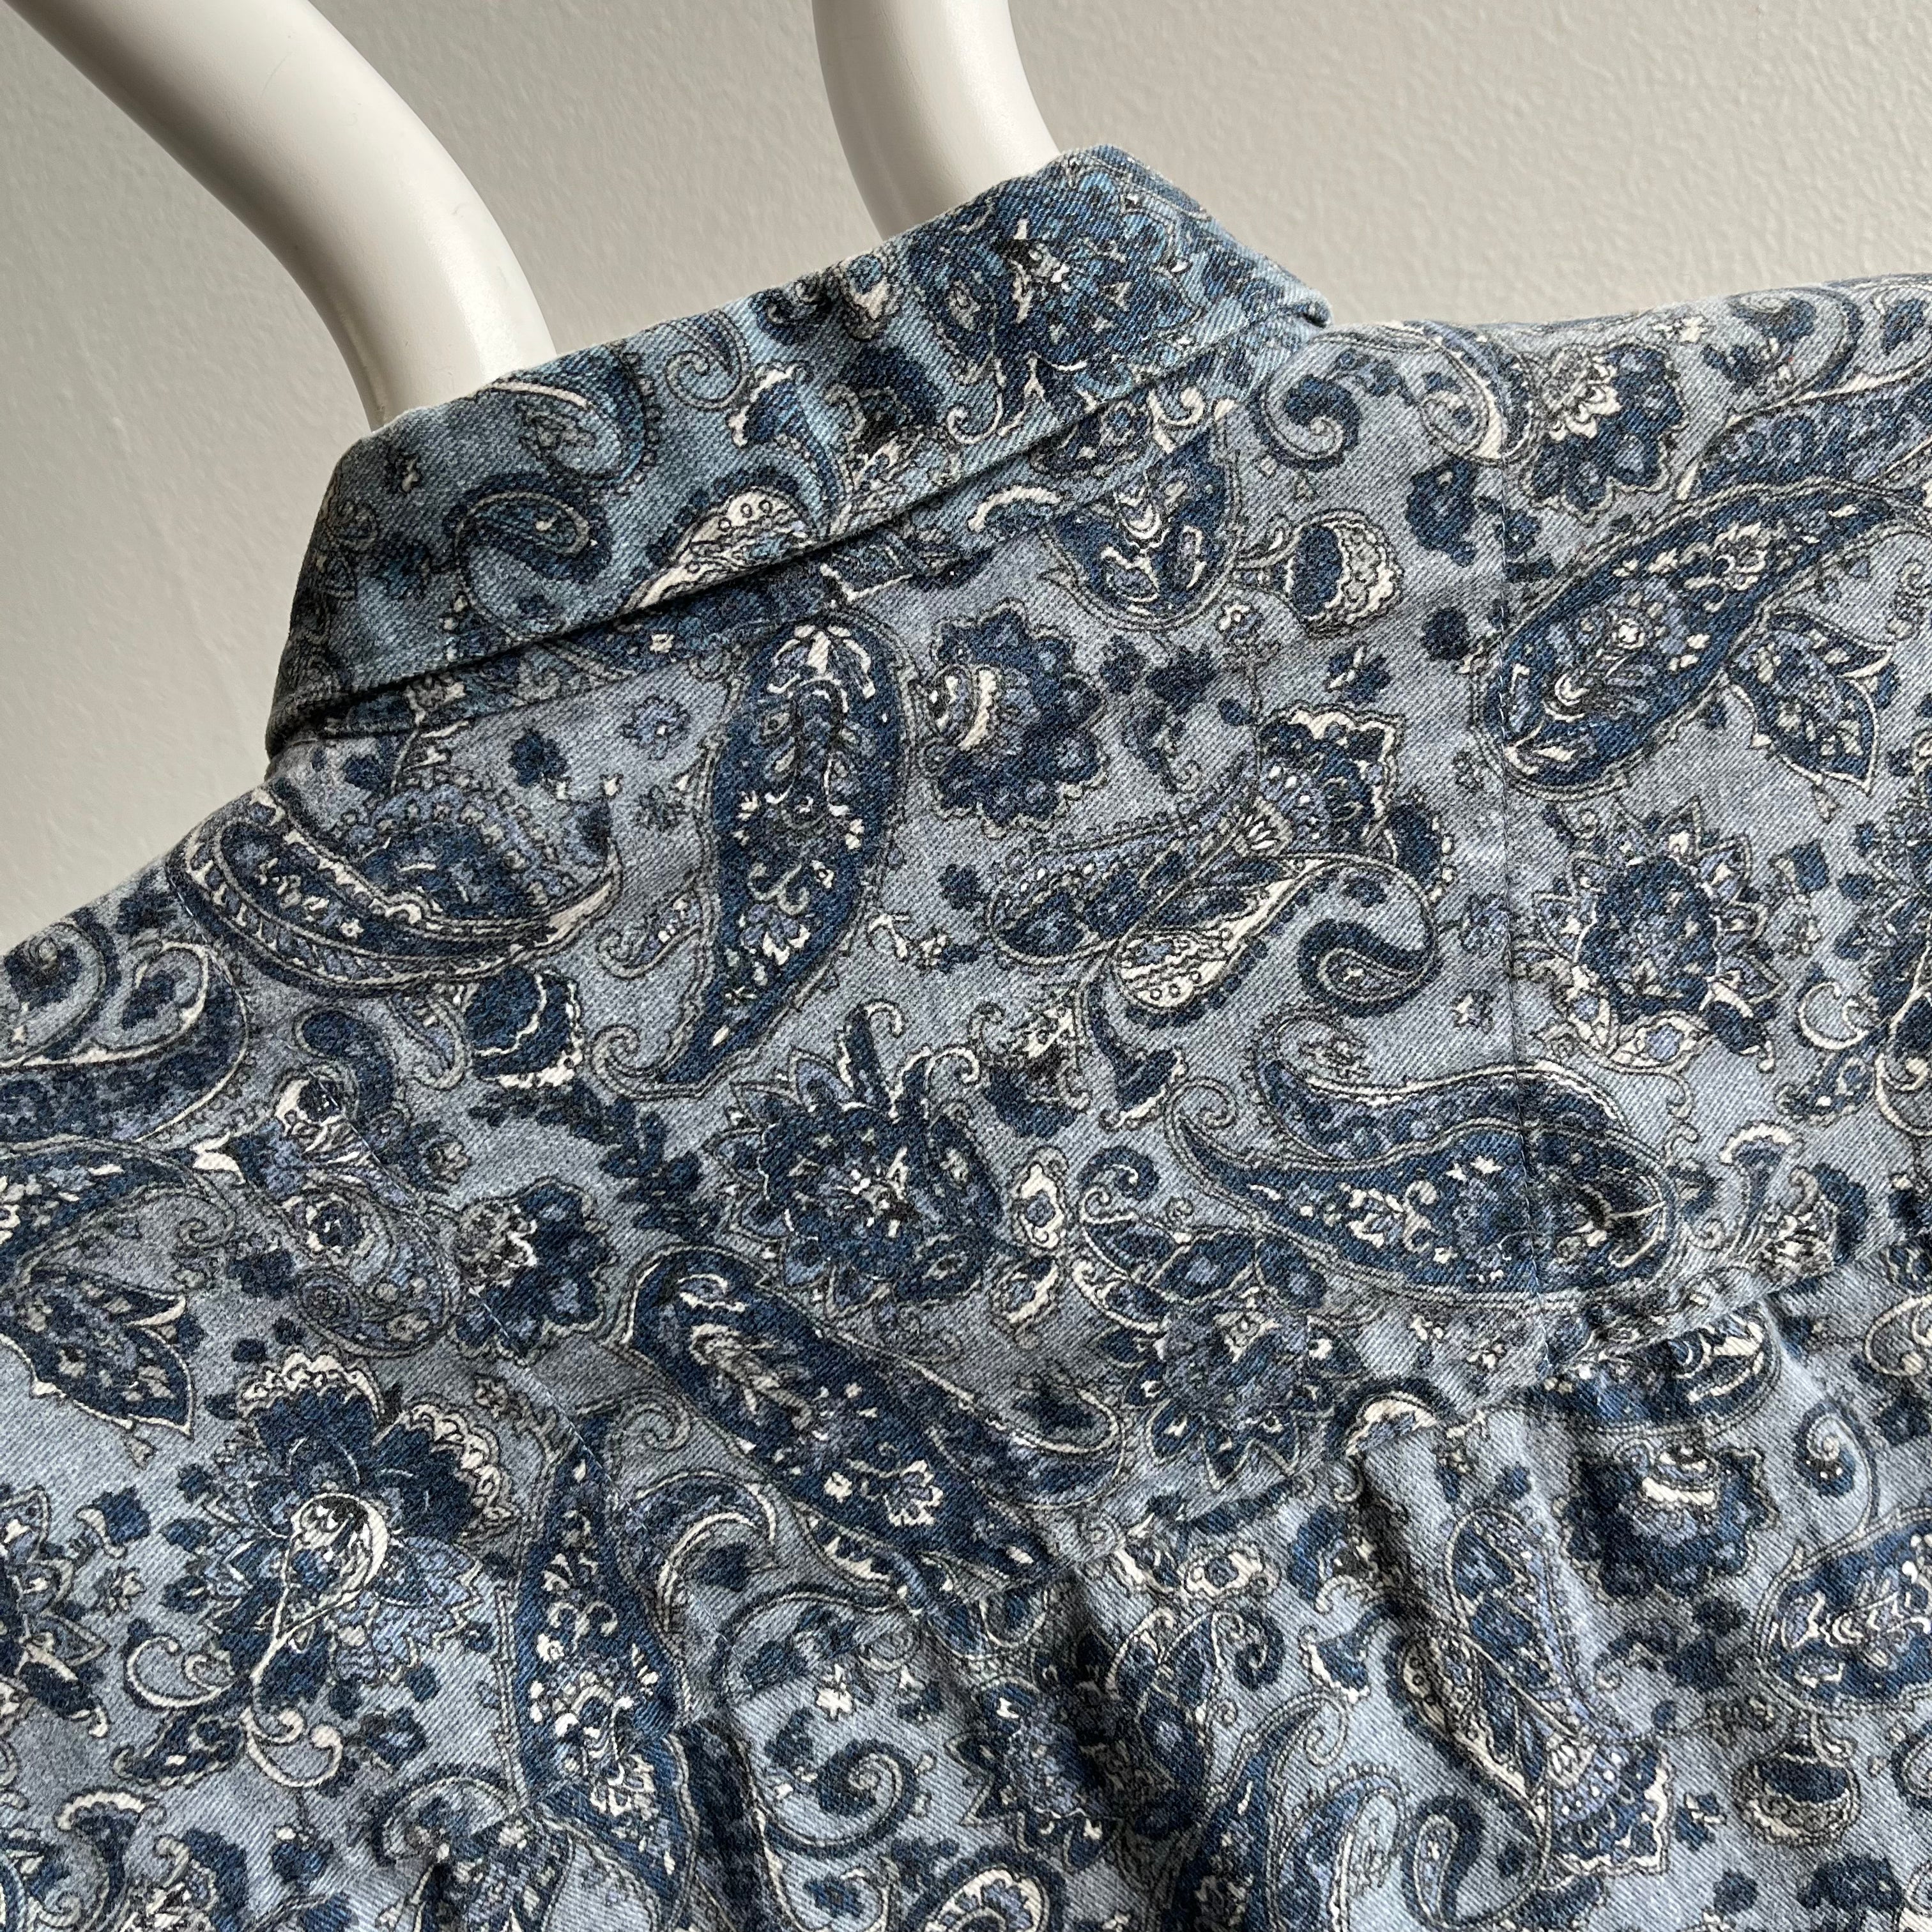 1990/2000s Super Soft Paisley Dad Style Button Down Shirt